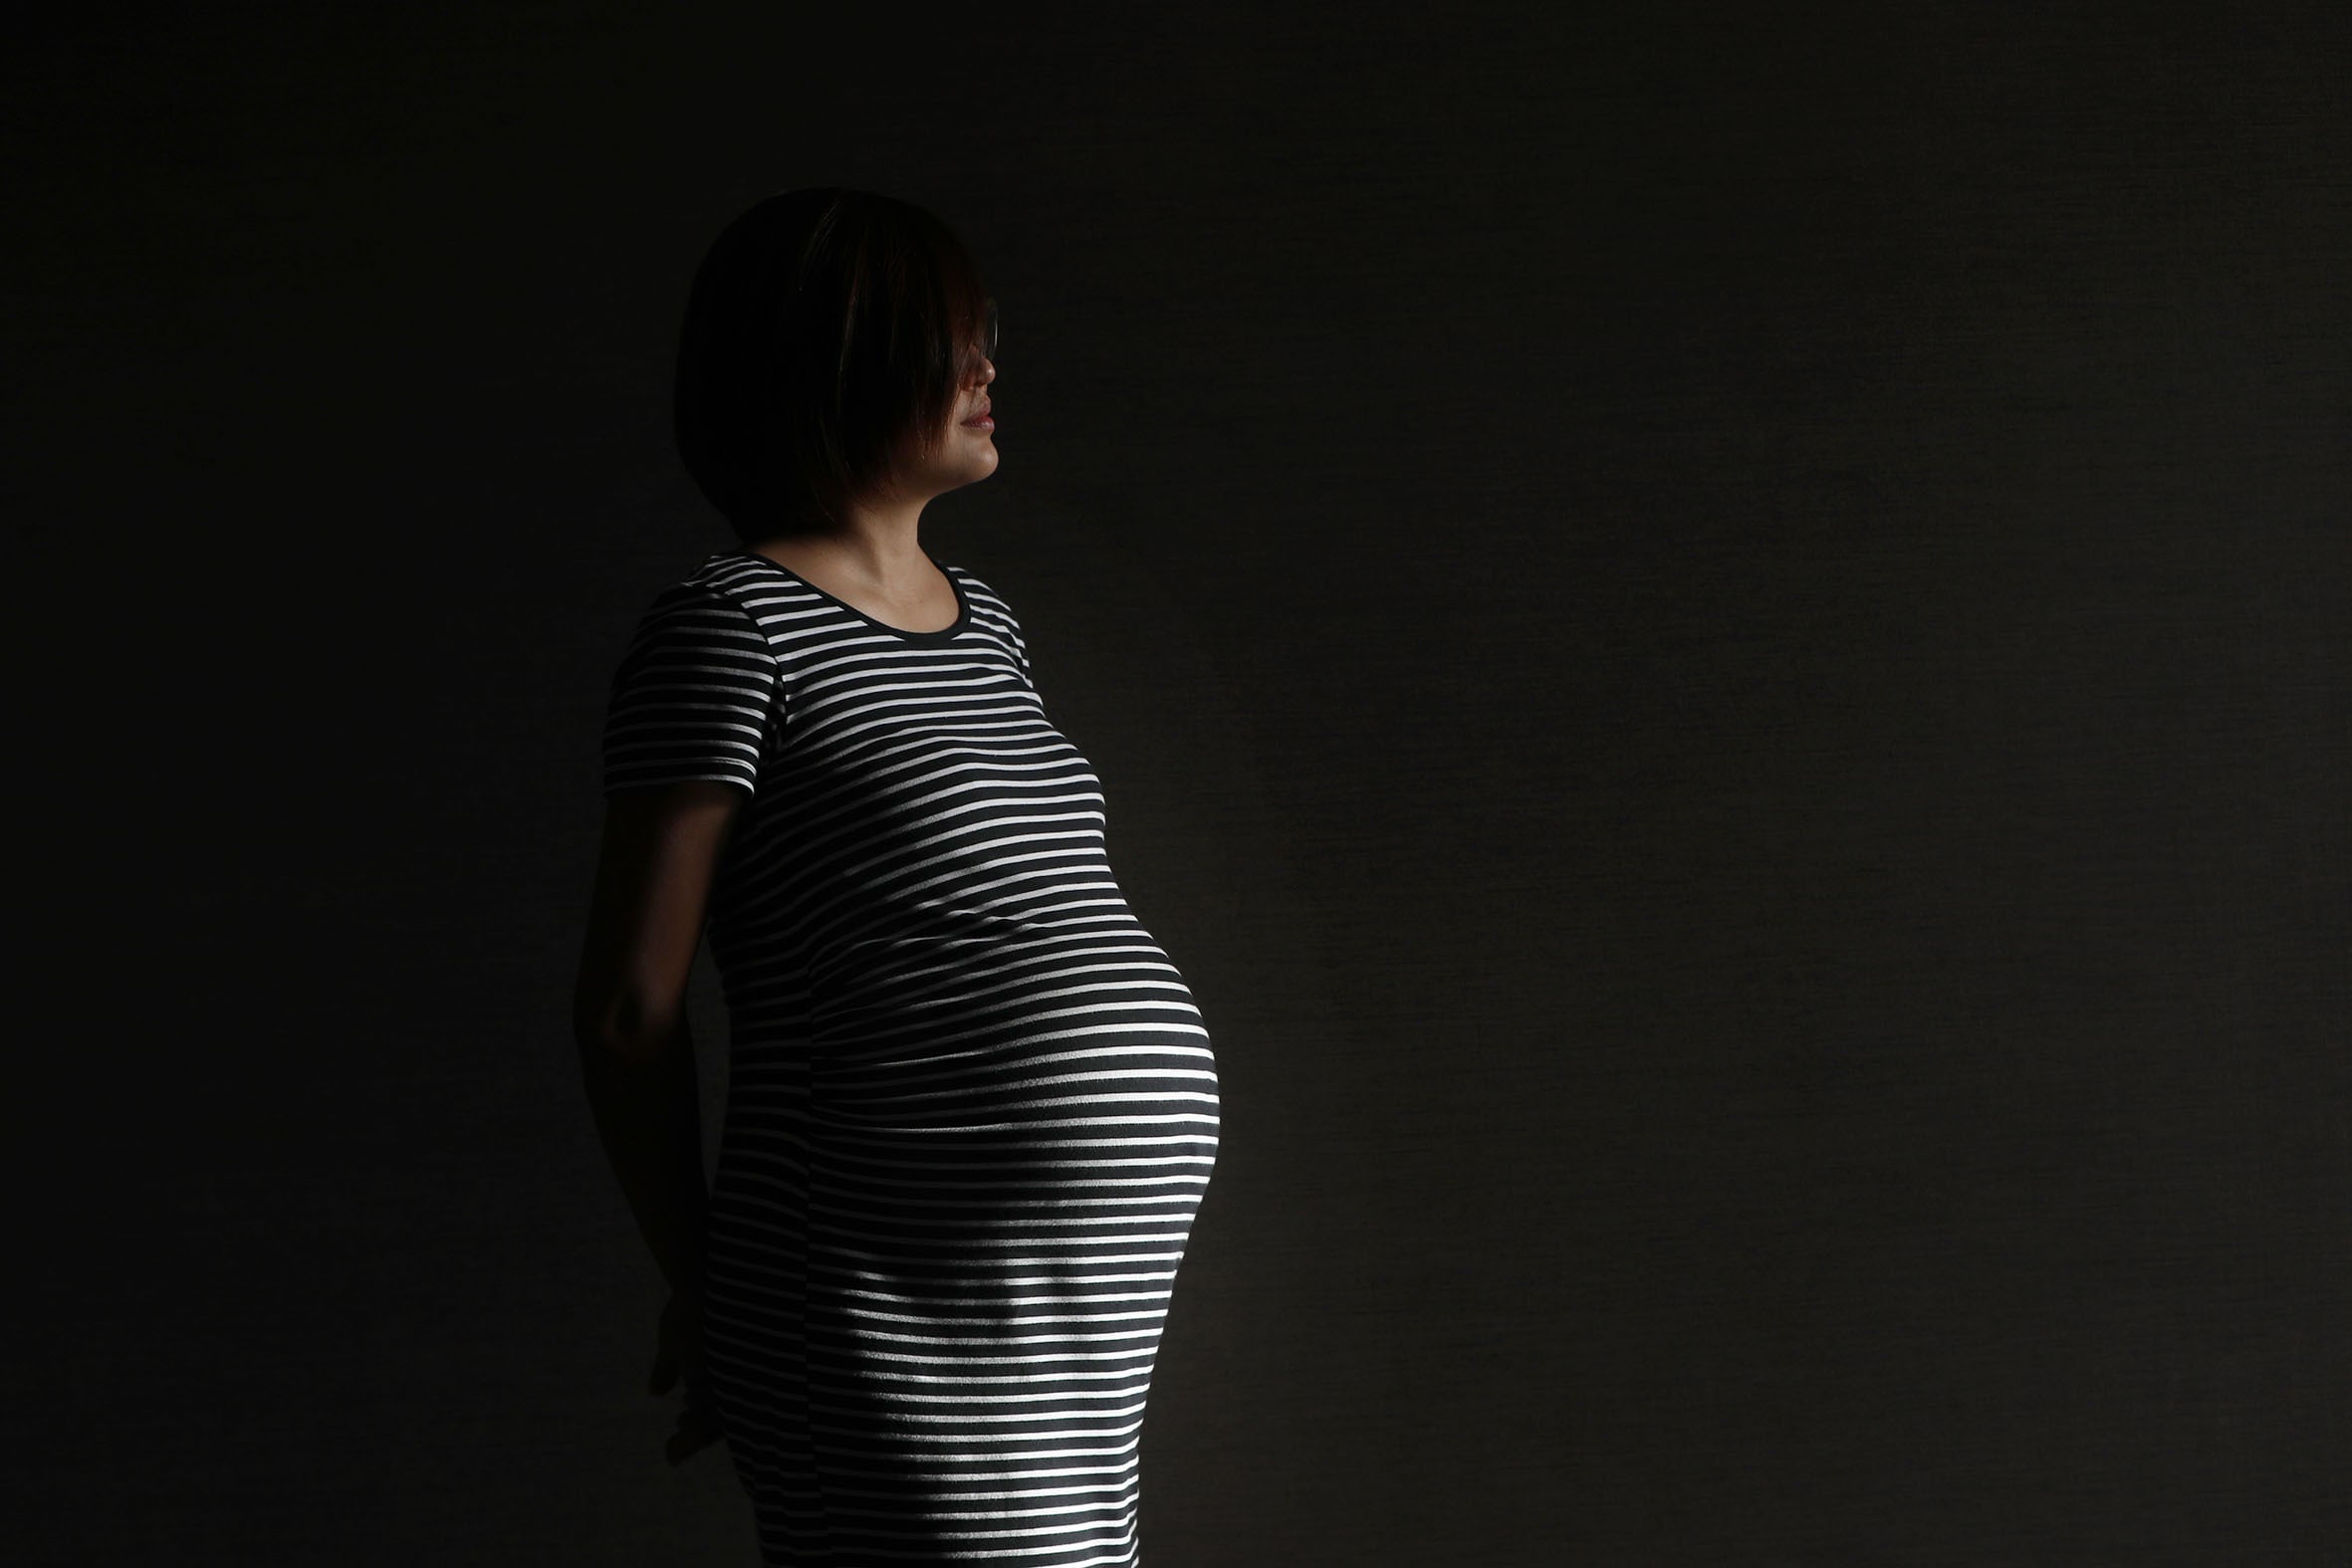 In a 2021 survey by the Ministry of Manpower, about 4 per cent of respondents said that they faced discrimination due to their “pregnancy status”, compared with around 23 per cent in 2018.